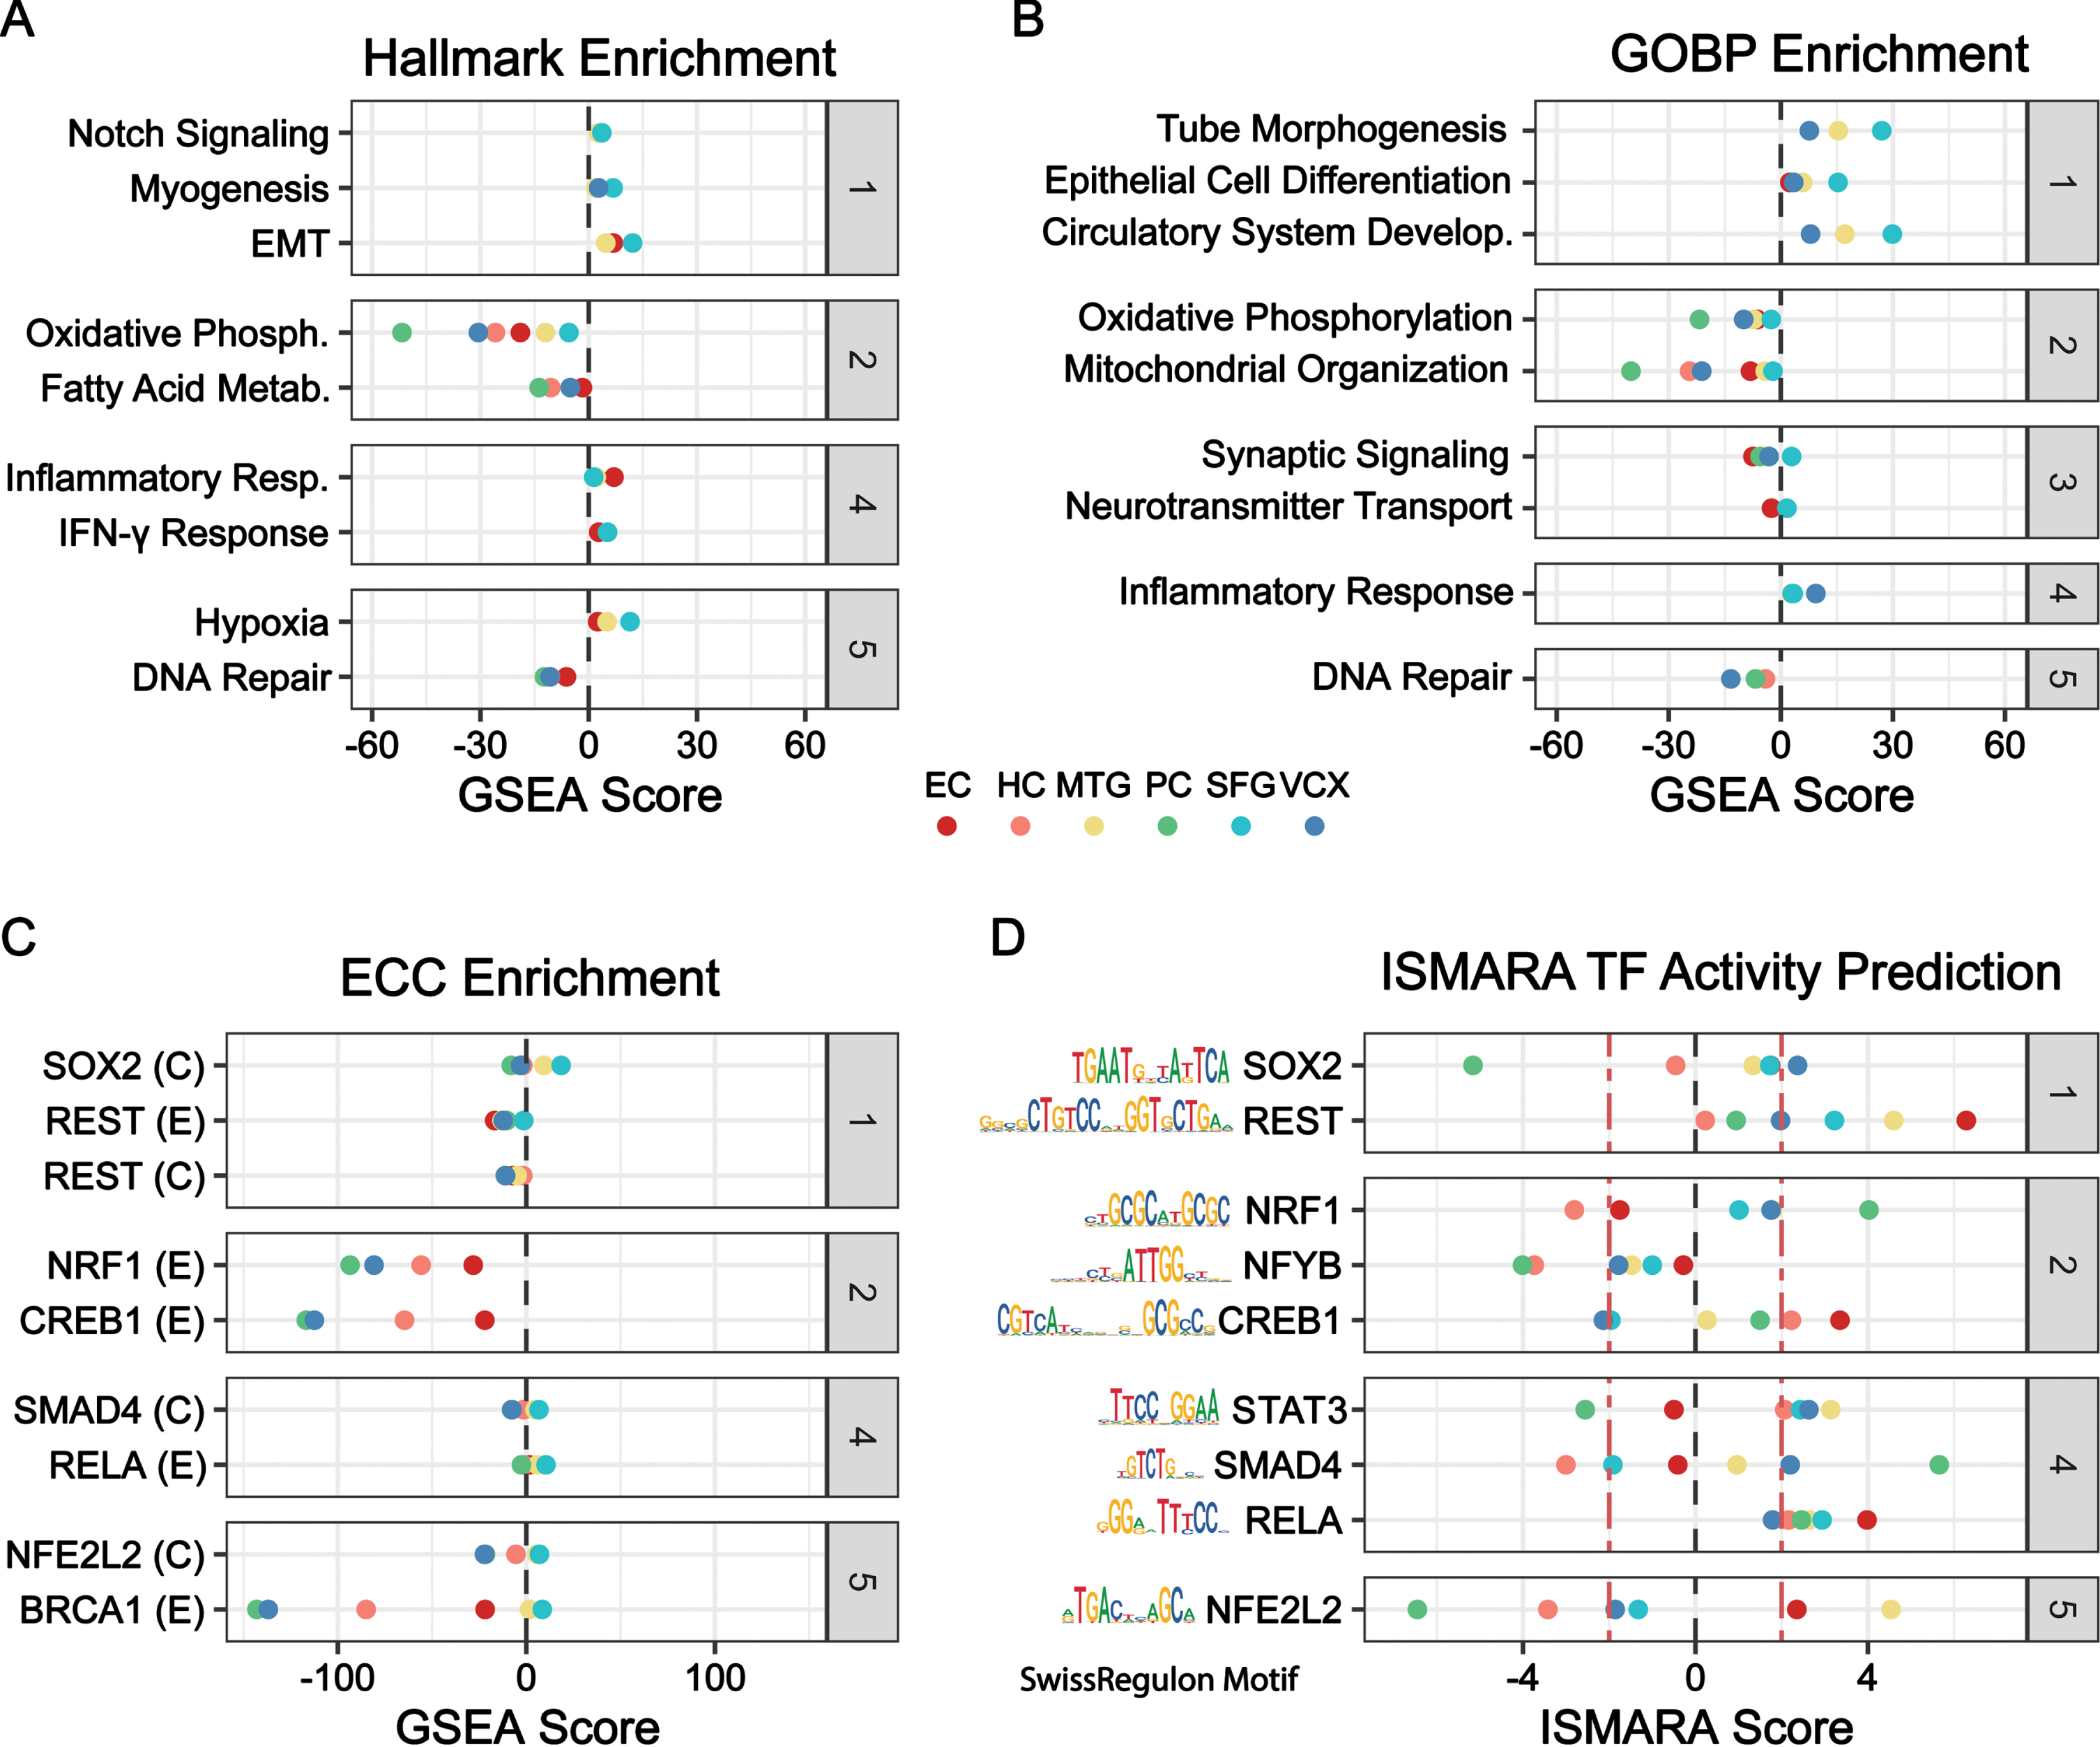 Functional enrichment, TF-target enrichment, and motif-based TF-activity prediction. Categories (gray): (1) Dedifferentiation, (2) Energetics, (3) Neuron Function, (4) Inflammation, (5) Stress Response. A-C) Geneset enrichment analysis by fgsea in all six brain regions using (A) Hallmark, (B) GOBP, and (C) ENCODE-ChEA Consensus (ECC) TF-gene target collection. GSEA score is the -log10 of the adjusted p-value multiplied by the sign of the NES (net enrichment score). D) ISMARA TF activity prediction using the Swiss regulon motif database across all six brain regions. ISMARA score is a function of the z-score, the direction of mean TF target expression change, and the direction of Pearson correlation between TF gene expression and target gene expression. The red line delineates the ISMARA score of ±2, outside of which terms are considered significant.